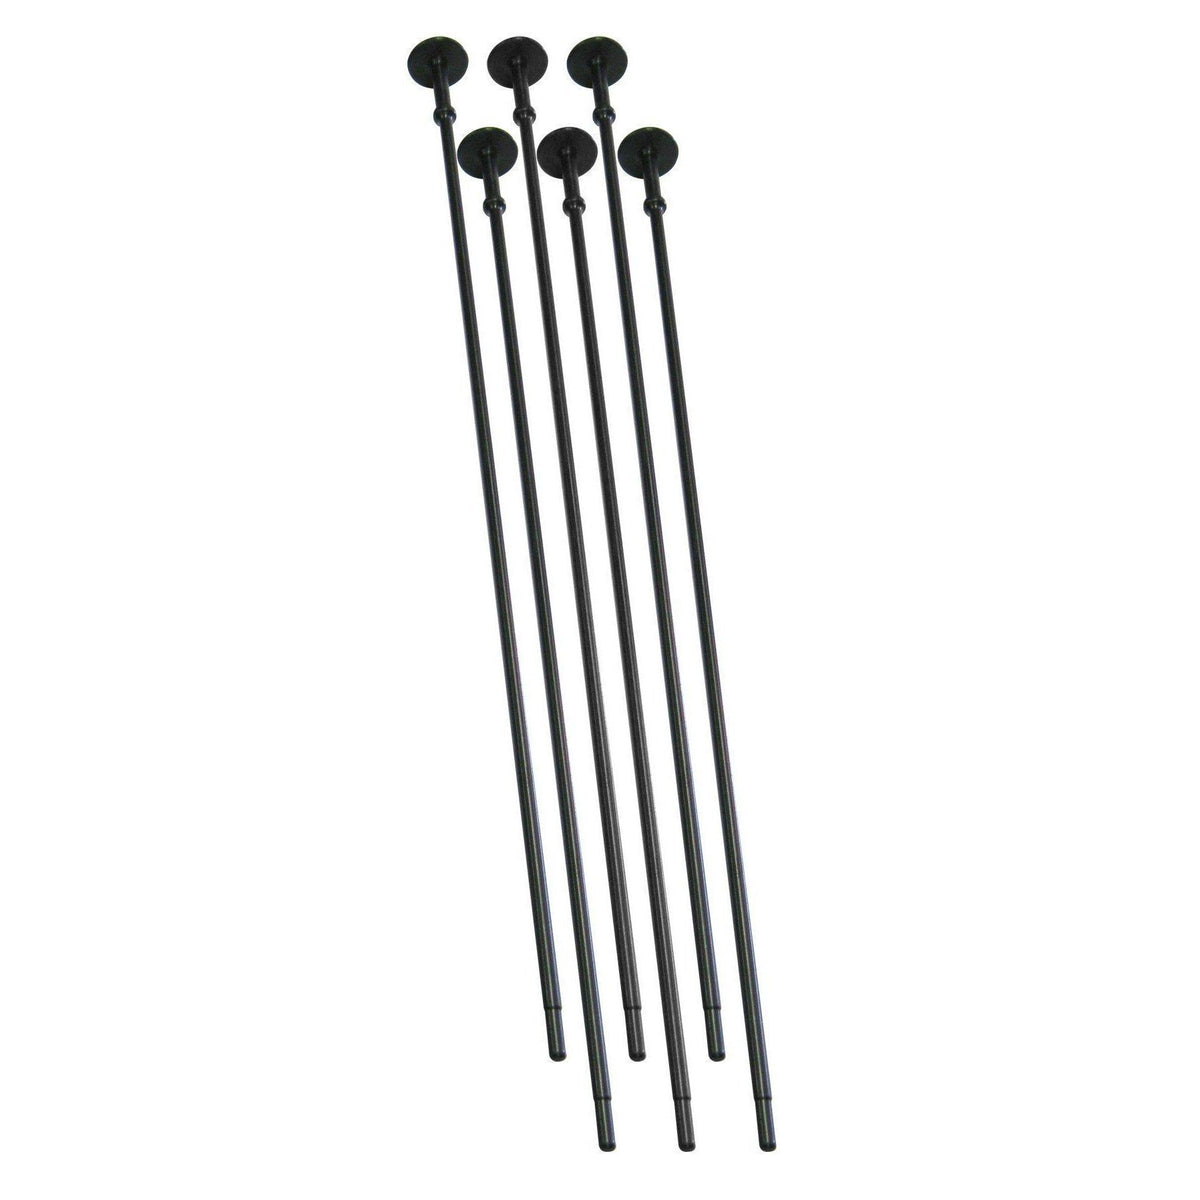 Accessory - Storage - Rifle Rod - 6 pack | Liberty Safe Norcal.